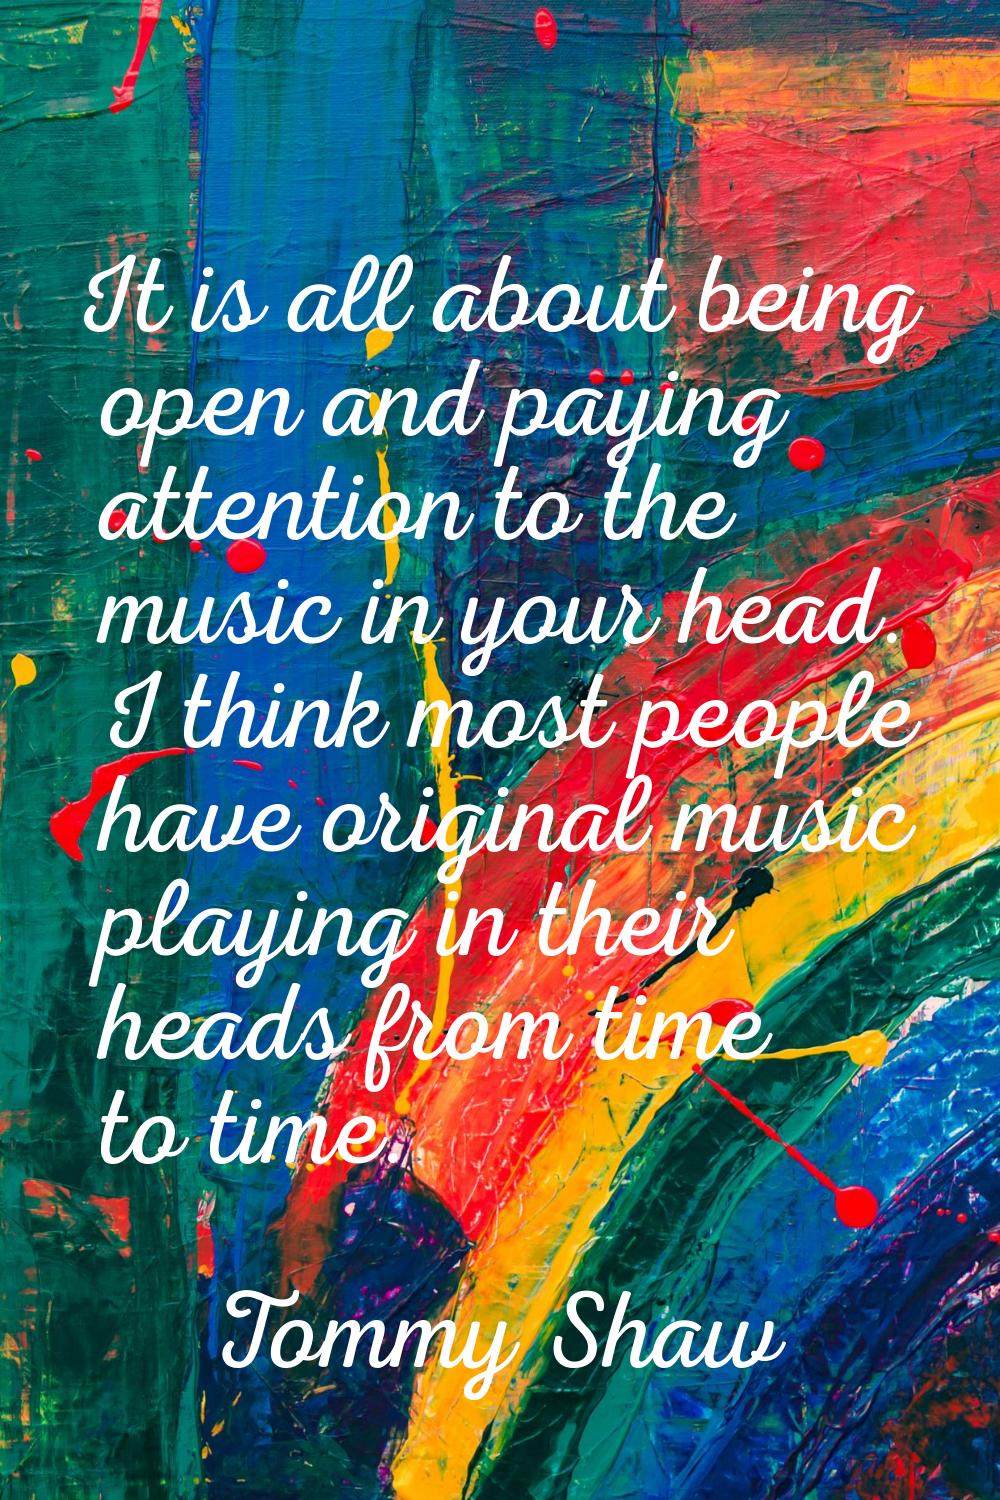 It is all about being open and paying attention to the music in your head. I think most people have